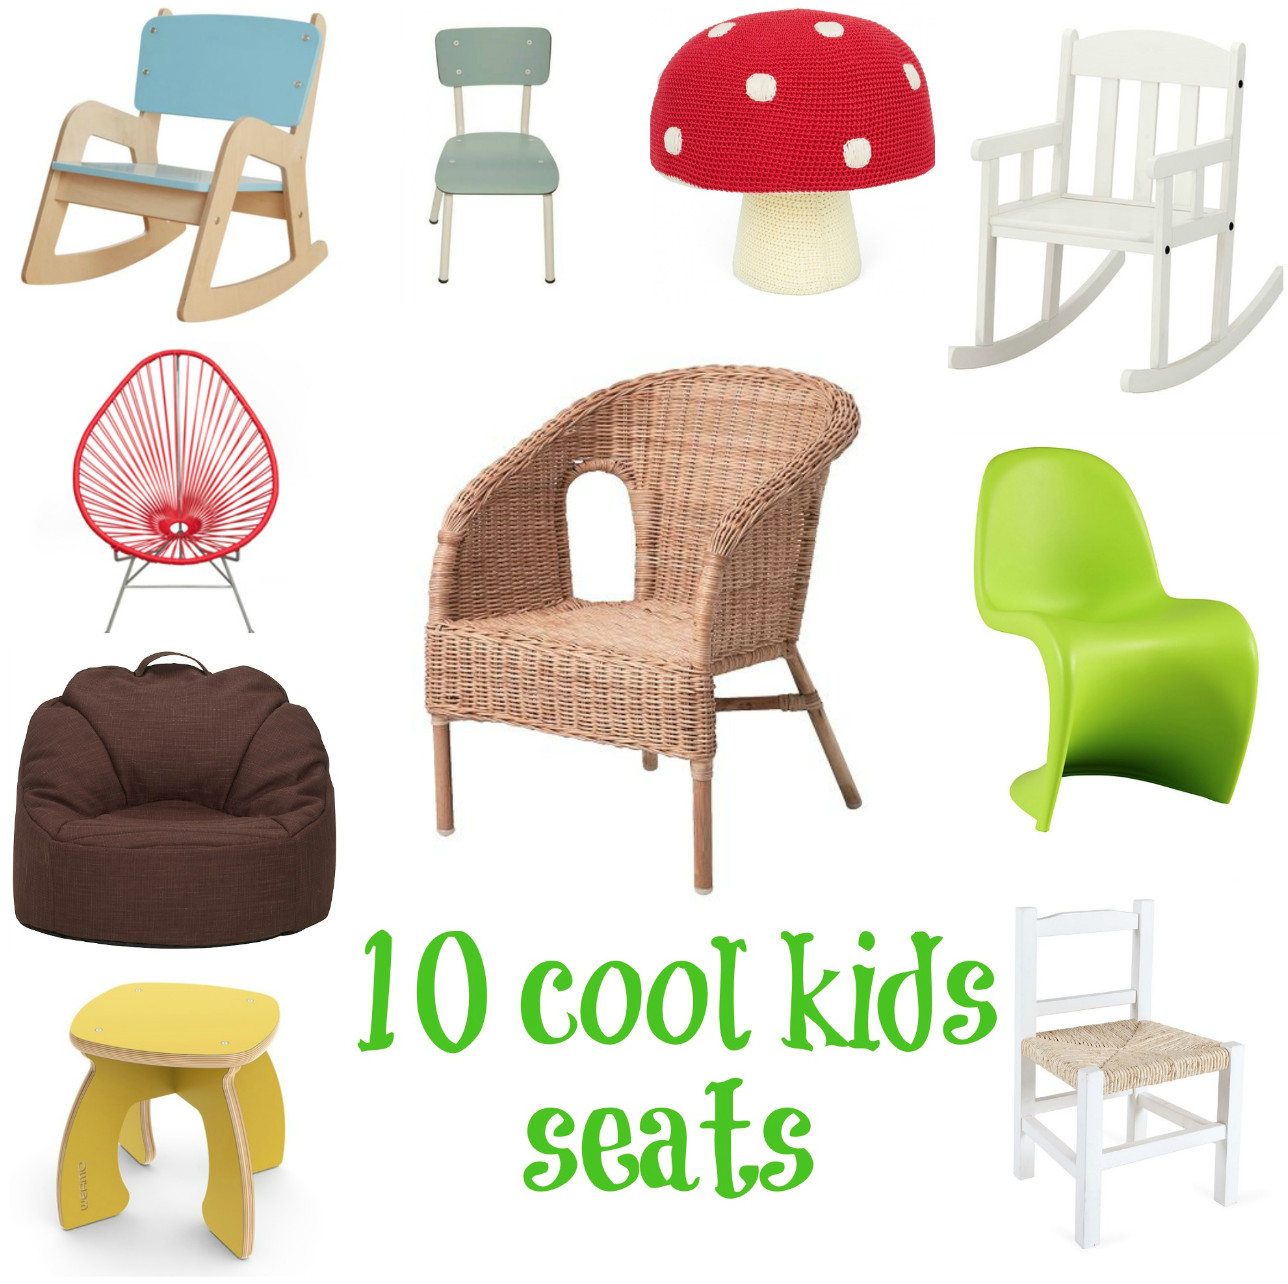 Cool Chair For Kids
 10 of the Best mini chairs and stools for kids mamas V I B